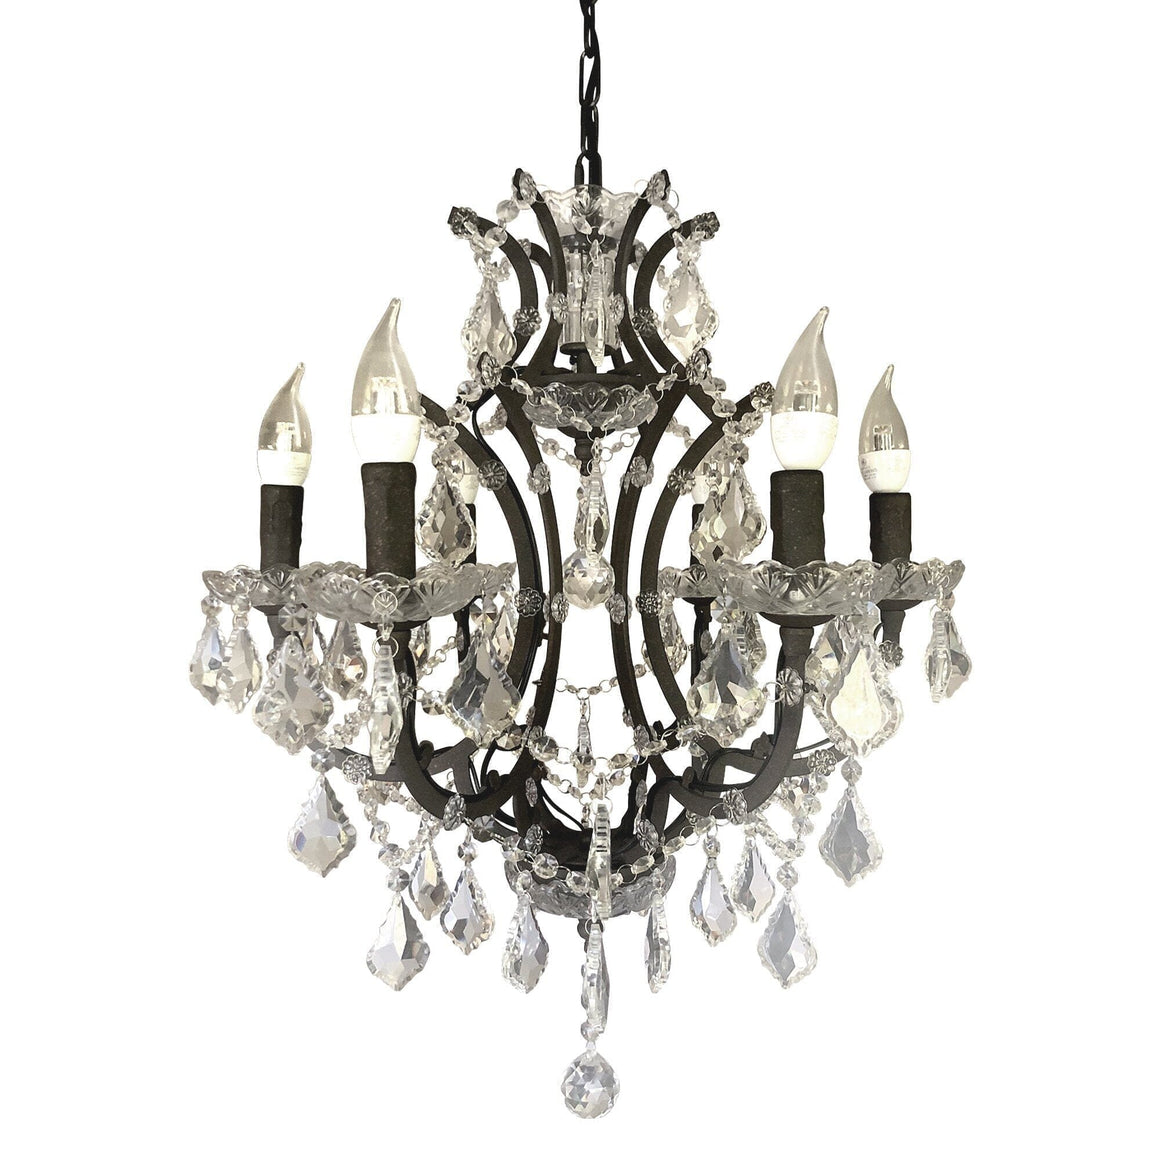 Classic Formal Crystal and Distressed Iron Chandelier - 6 Lights - Rustic Deco Incorporated